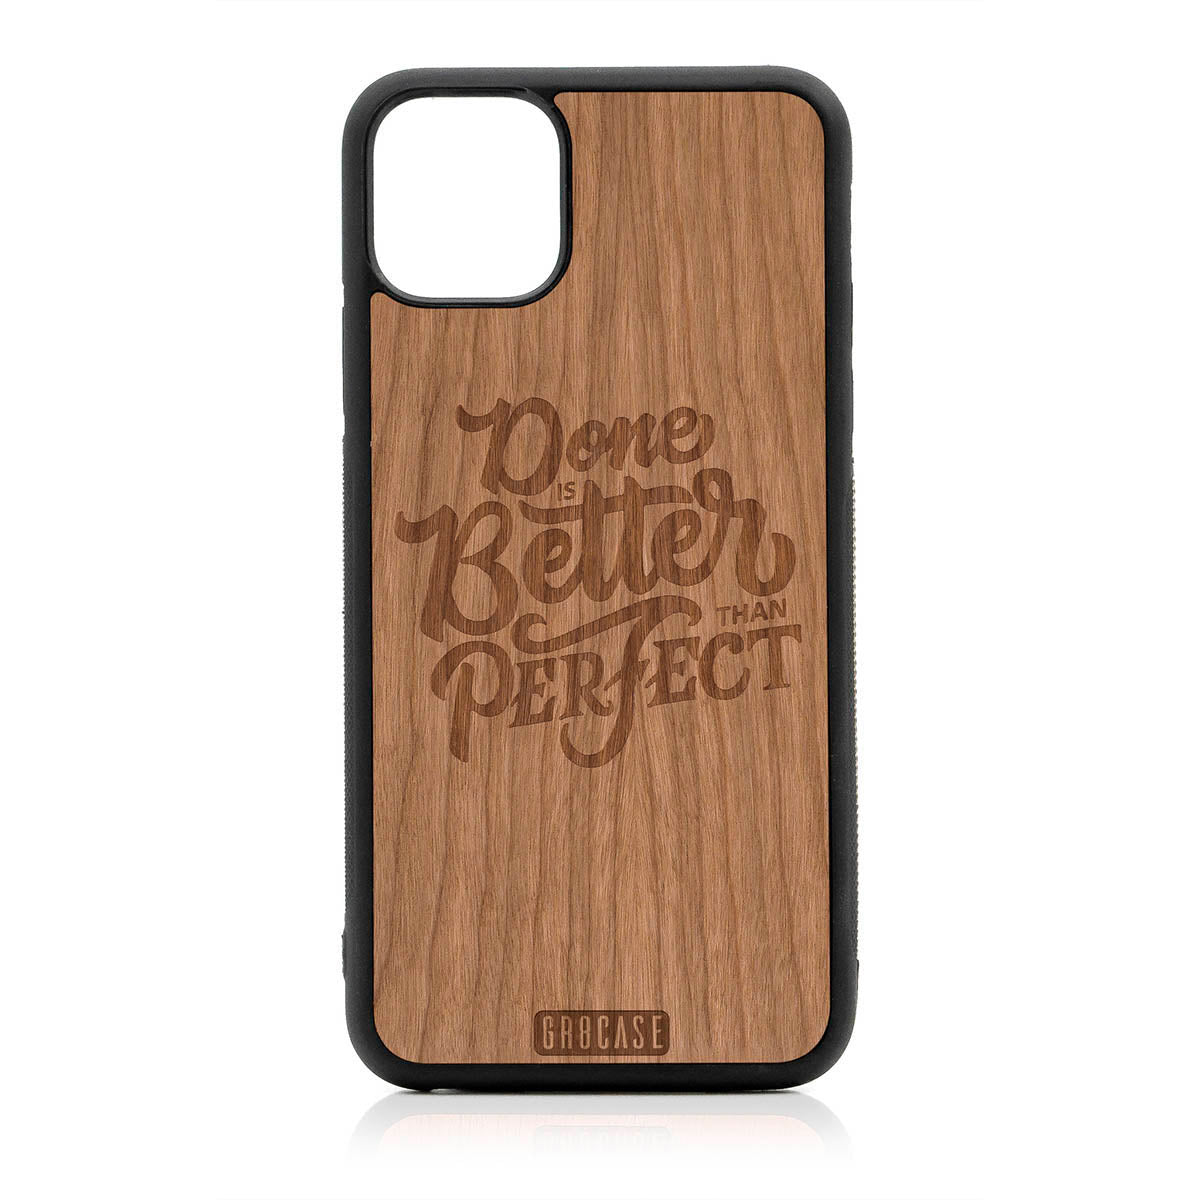 Done Is Better Than Perfect Design Wood Case For iPhone 11 Pro Max by GR8CASE